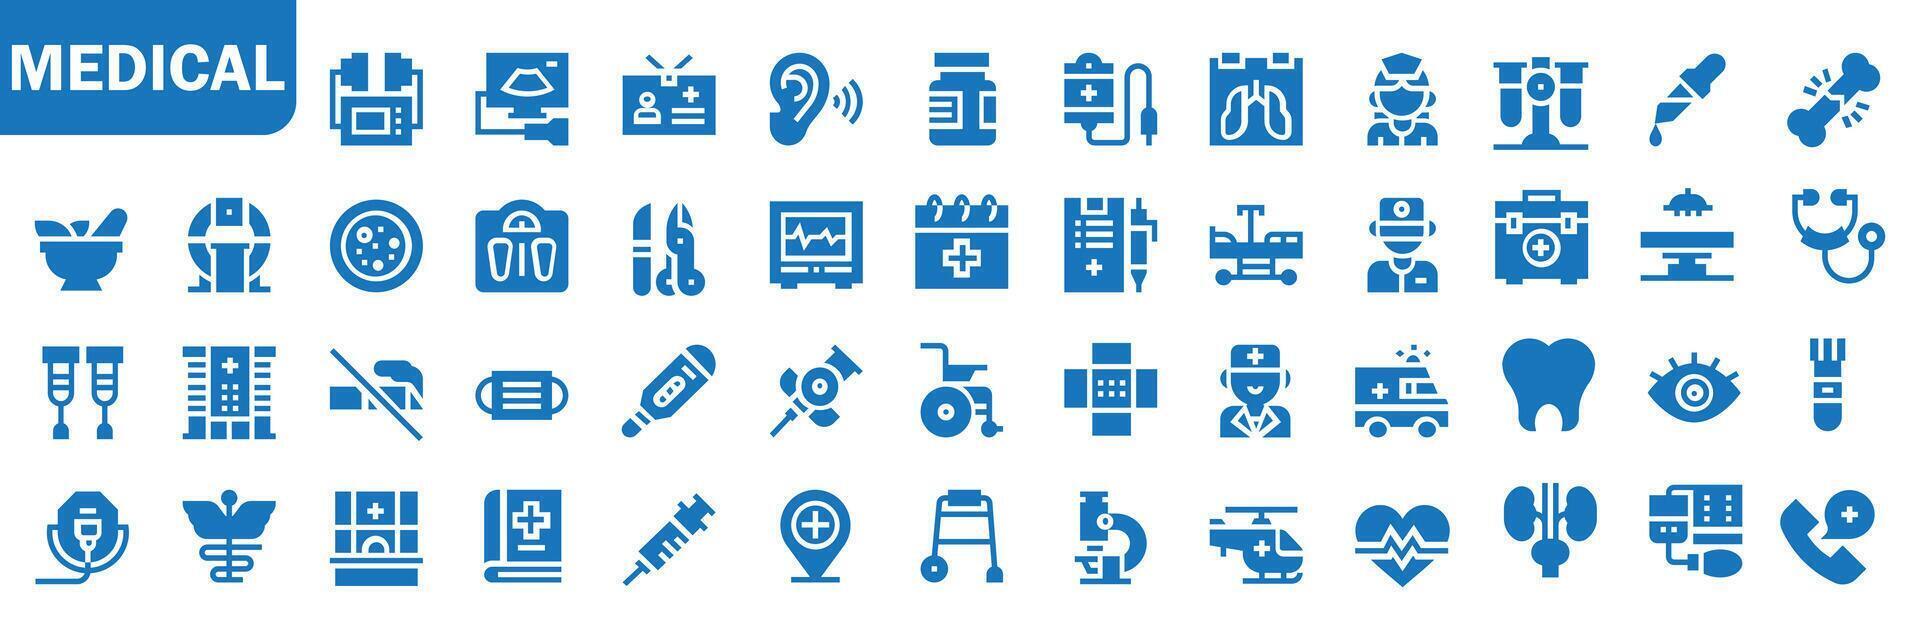 Collection of medical icons. Medicine and healthcare icons set. Collection of medical symbols. eps 10 vector